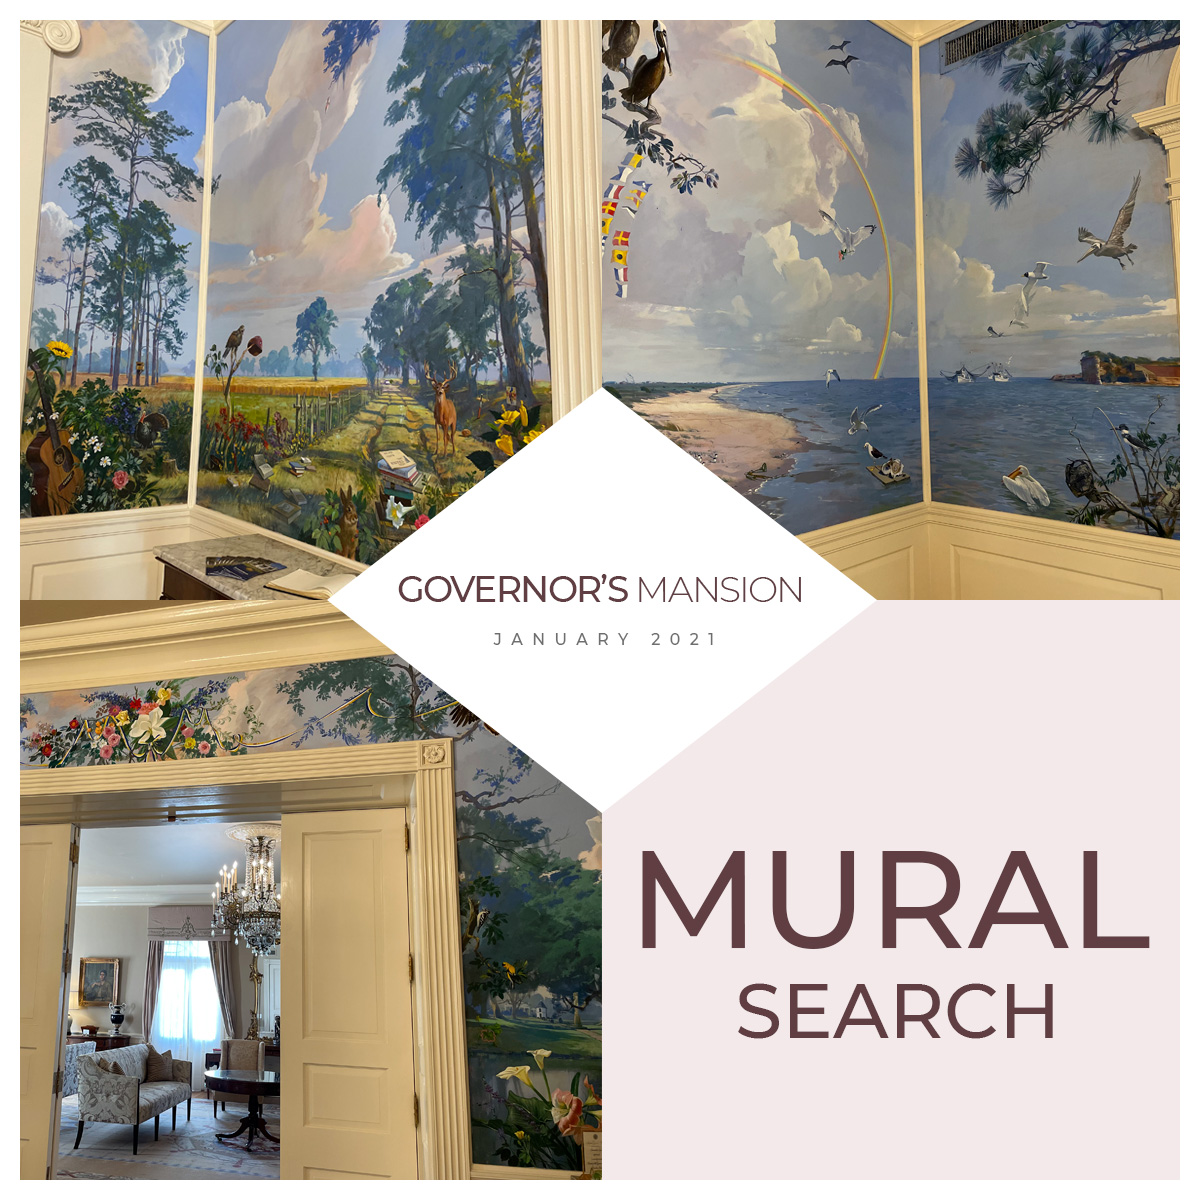 The Governor’s Mansion Mural Search